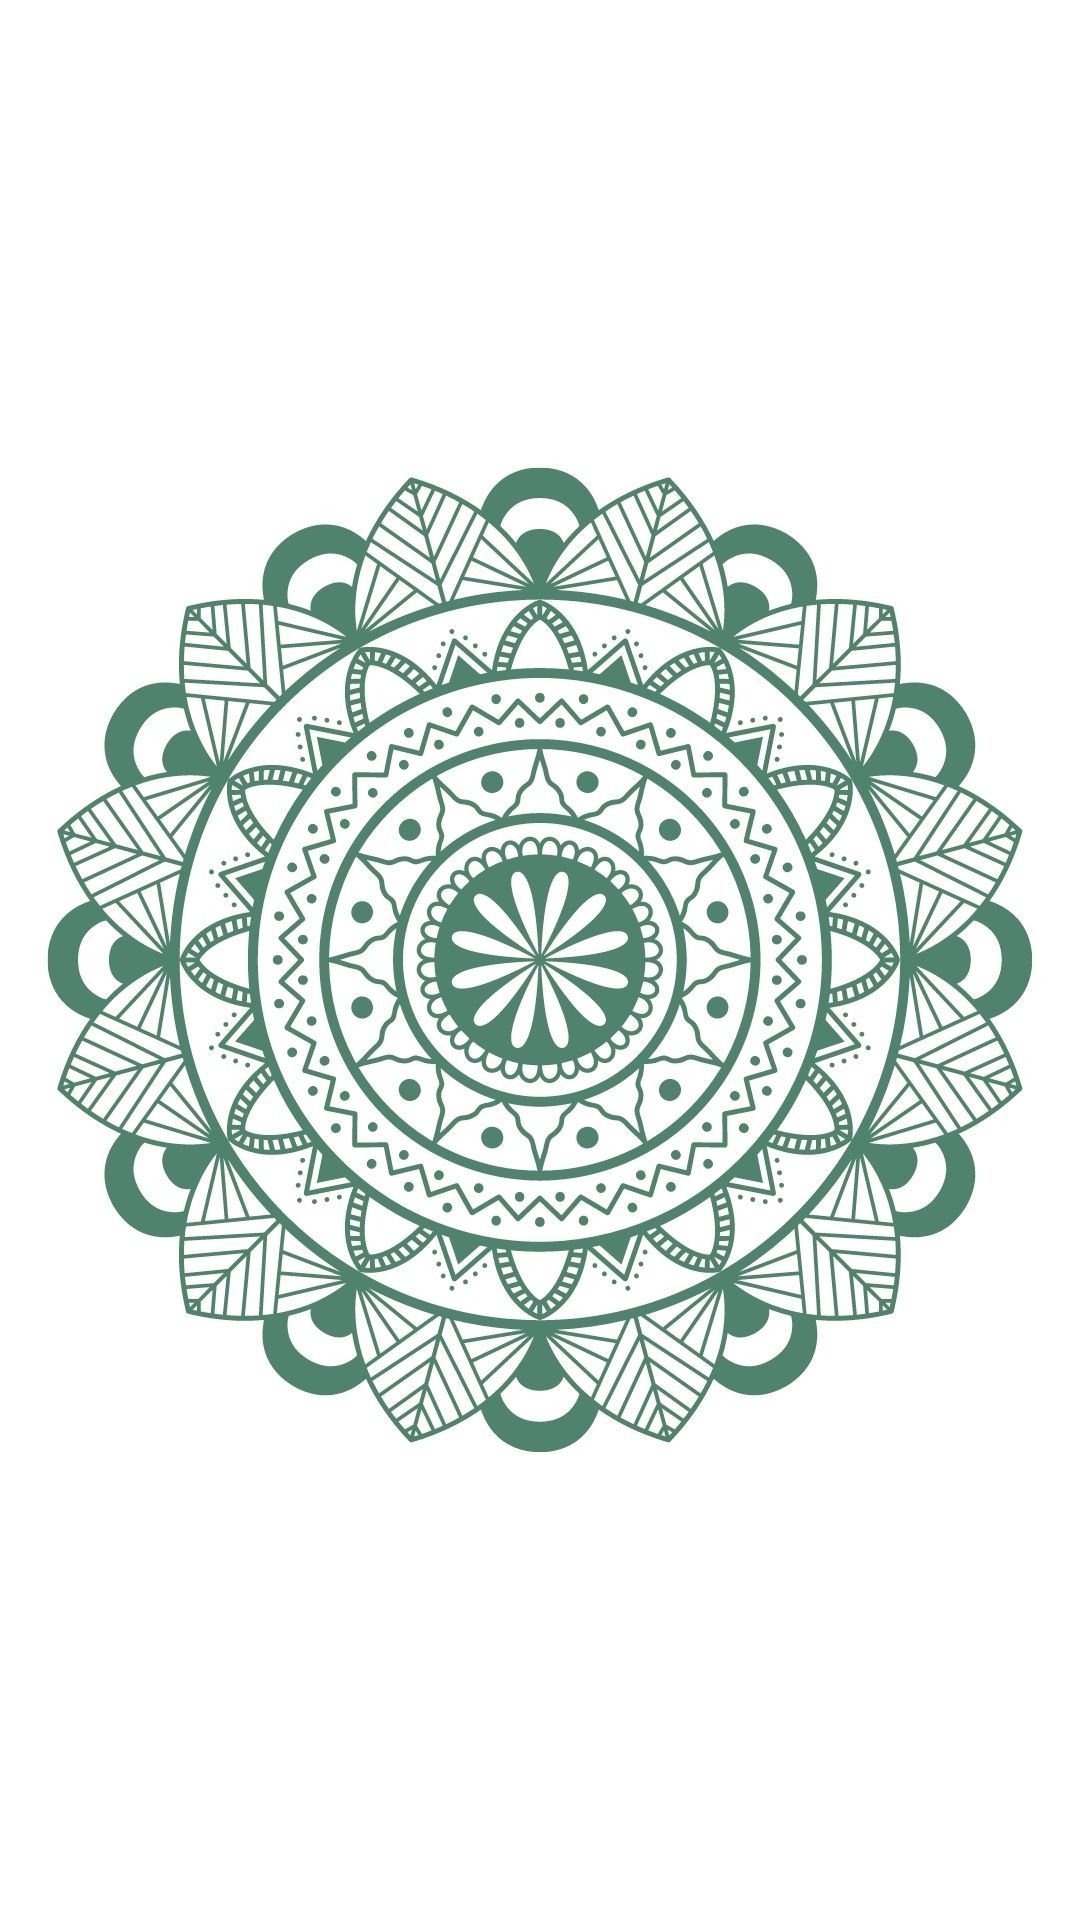 A circular pattern of green on a white background - Sage green